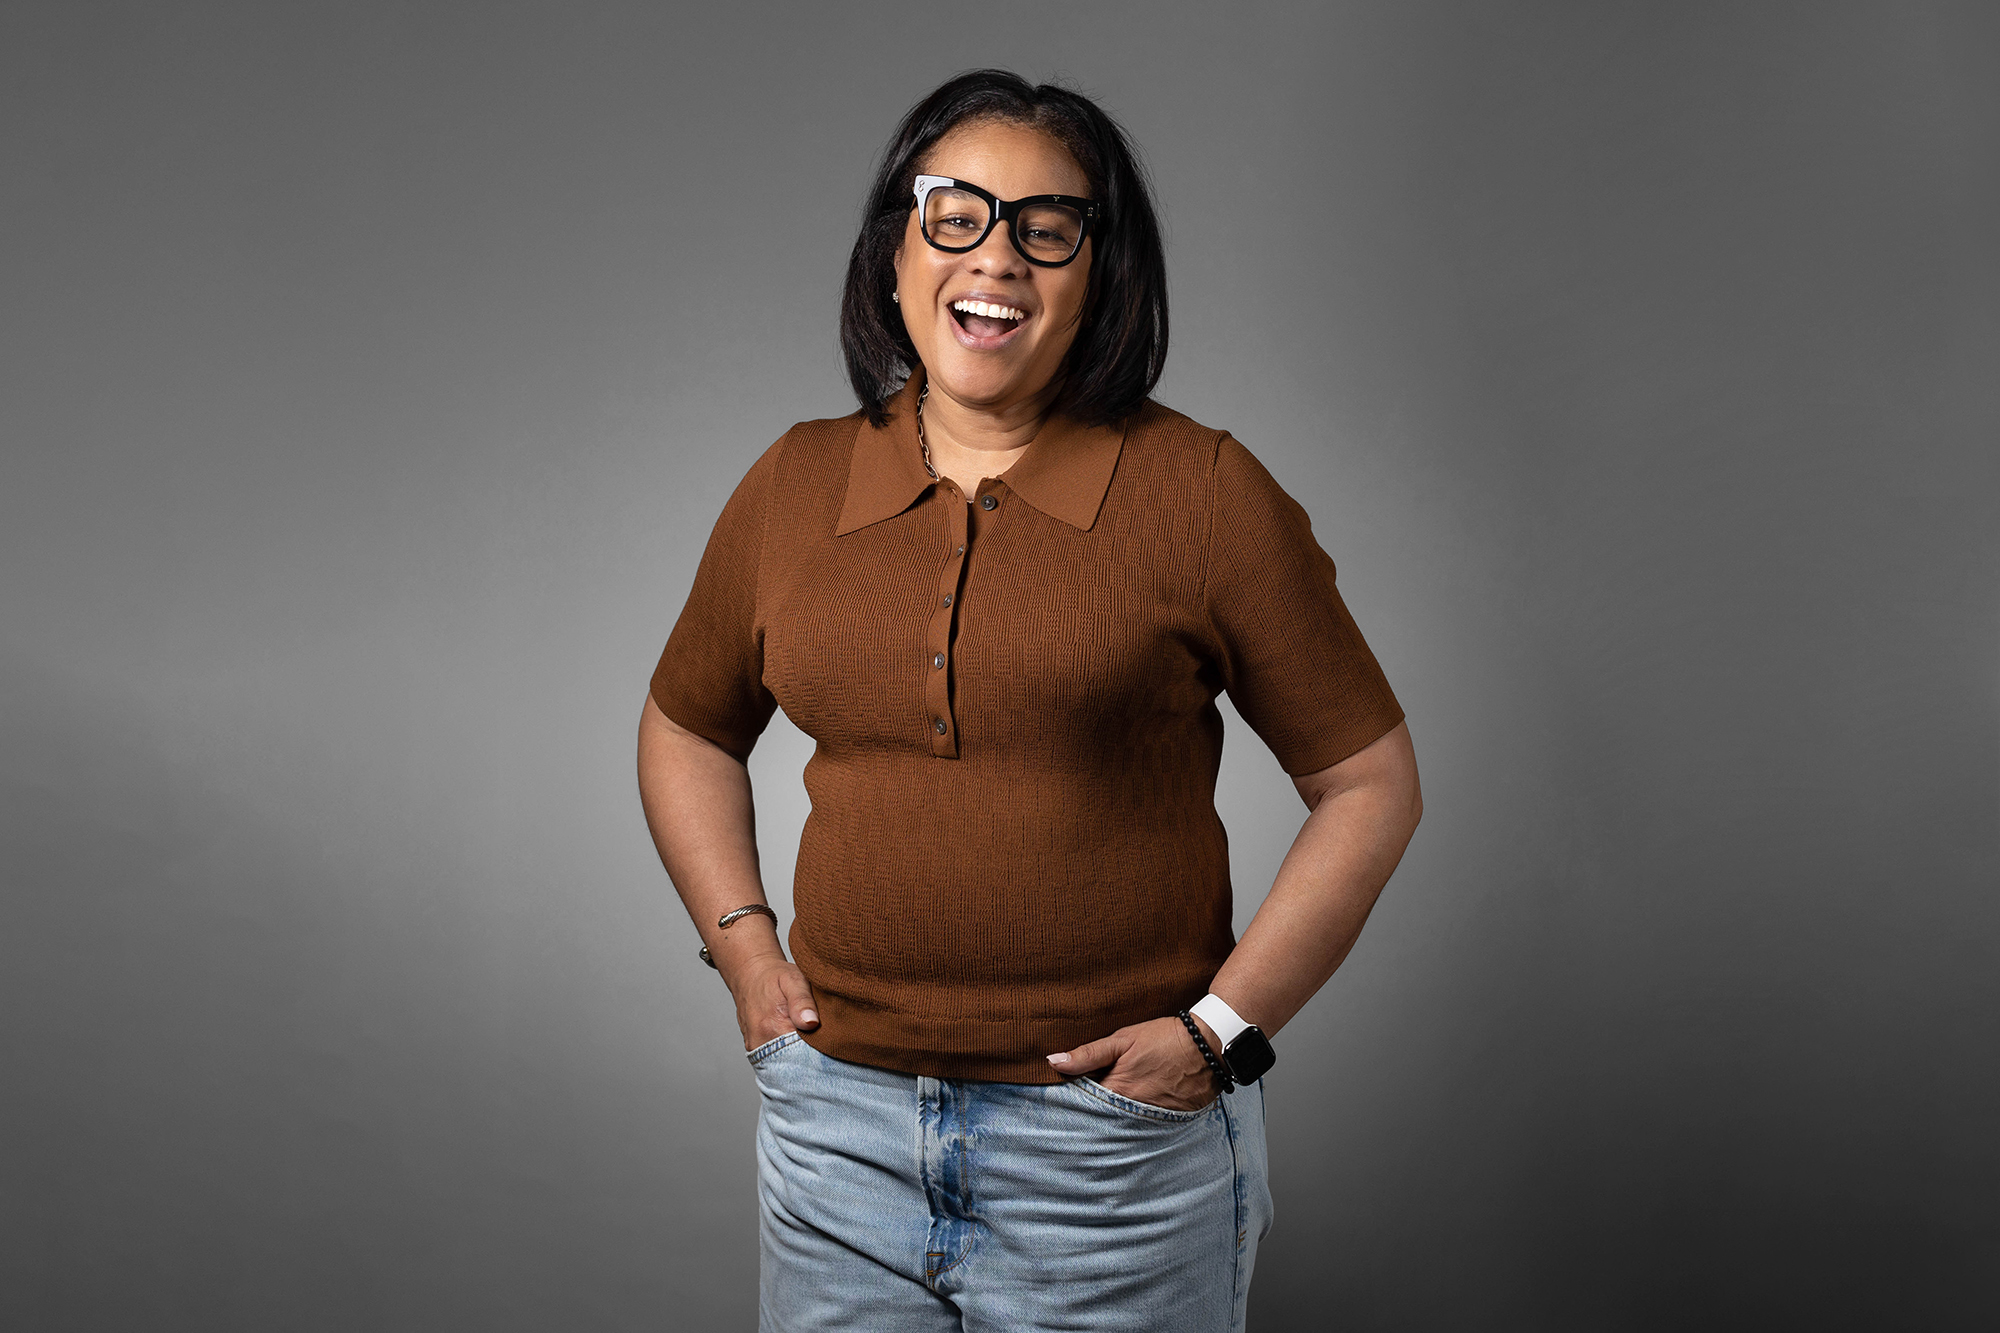 A woman wearing glasses and jeans posing for a corporate headshot.